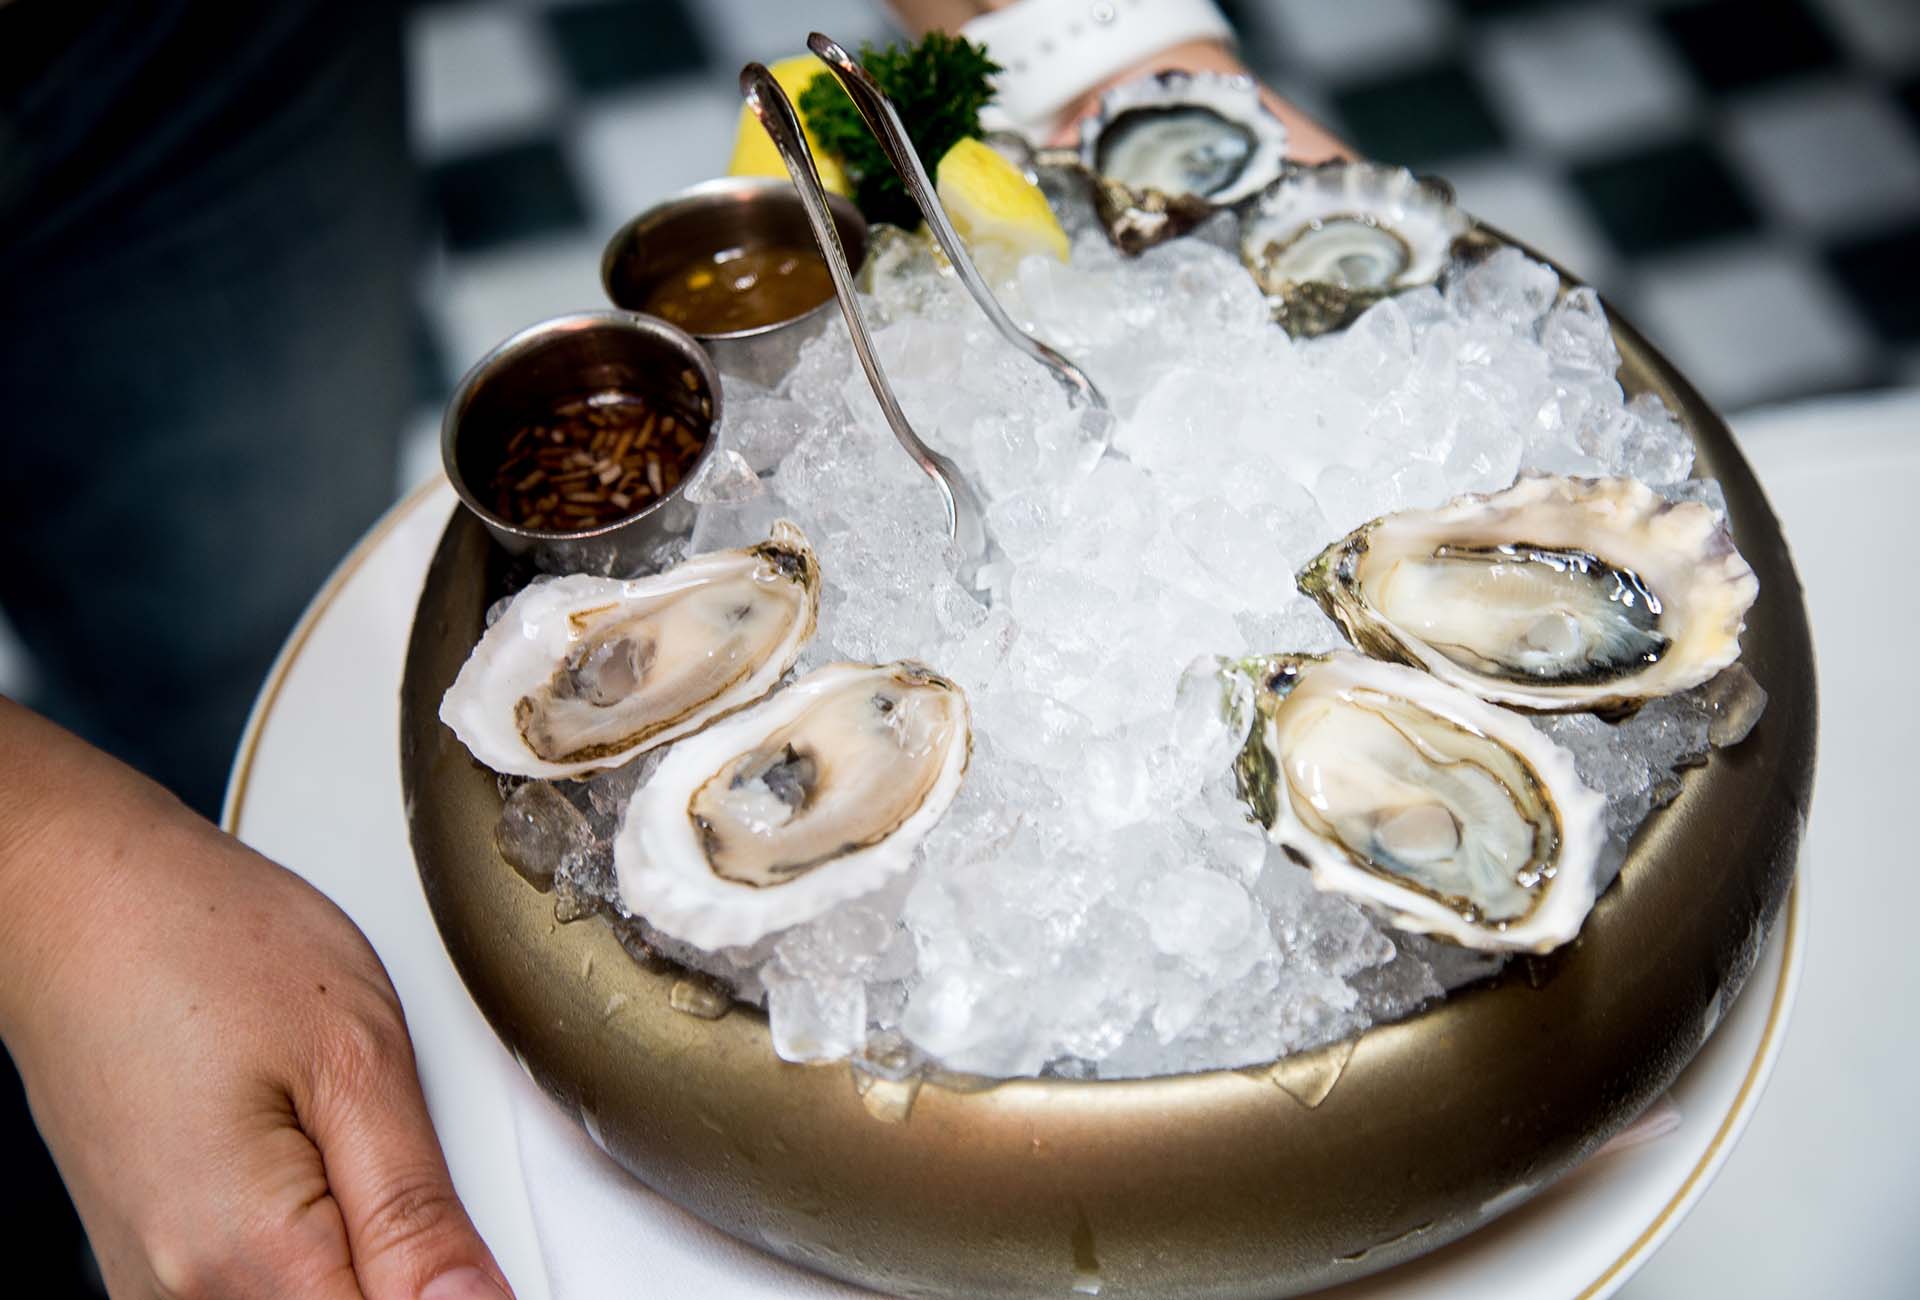 Oysters from the raw bar range from four to five dollars